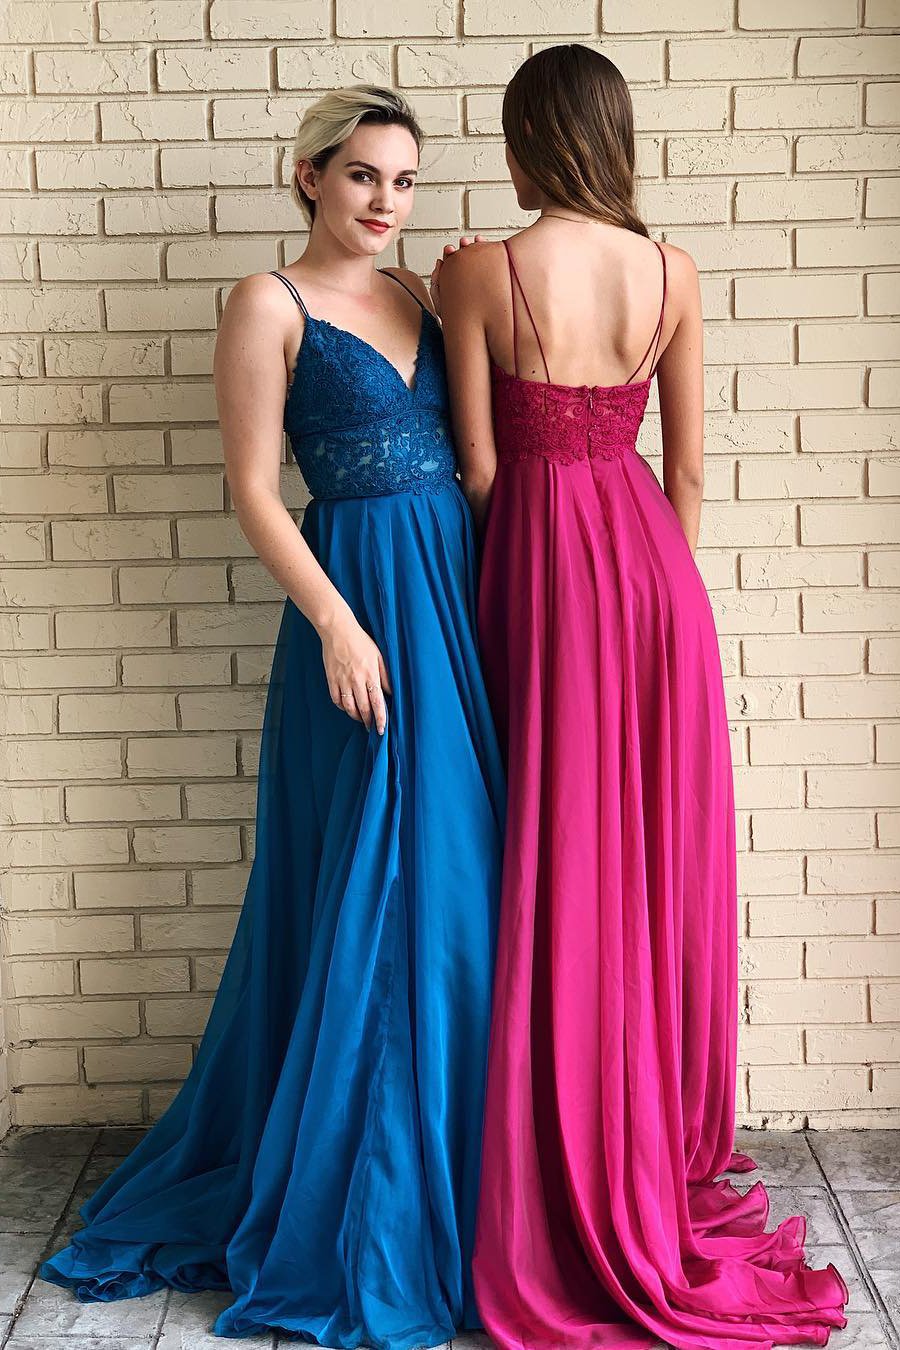 2020 New Style Prom Dress Long, Evening Dress ,Winter Formal Dress, Pageant Dance Dresses, Graduation School Party Gown, PC0204 - Promcoming